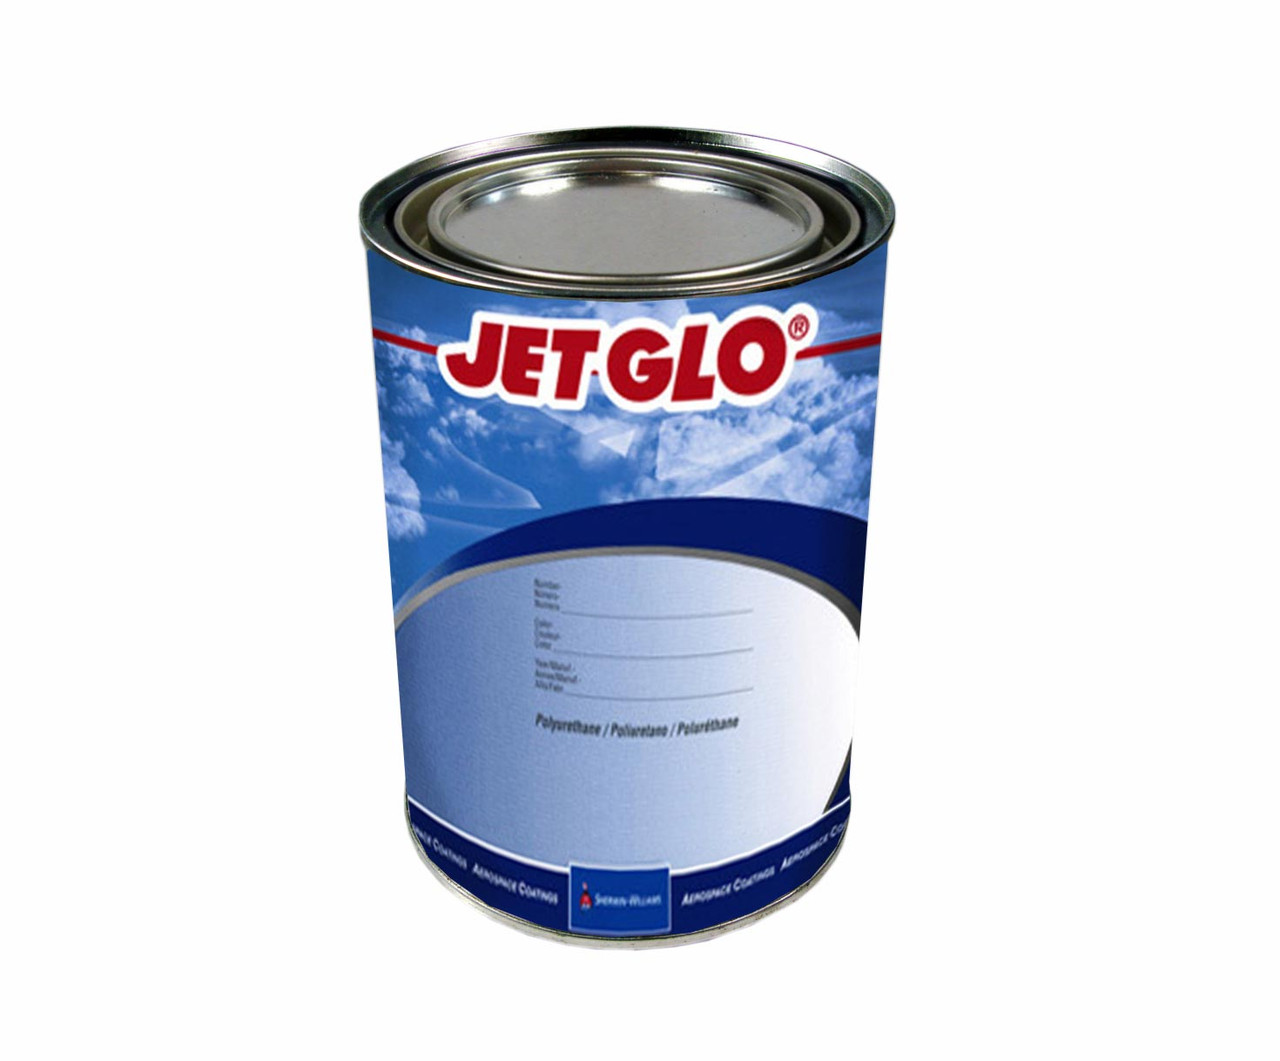 Sherwin-Williams U05248 JET GLO Air Tractor Yellow Polyurethane Exterior  Topcoat Paint - Gallon Can at